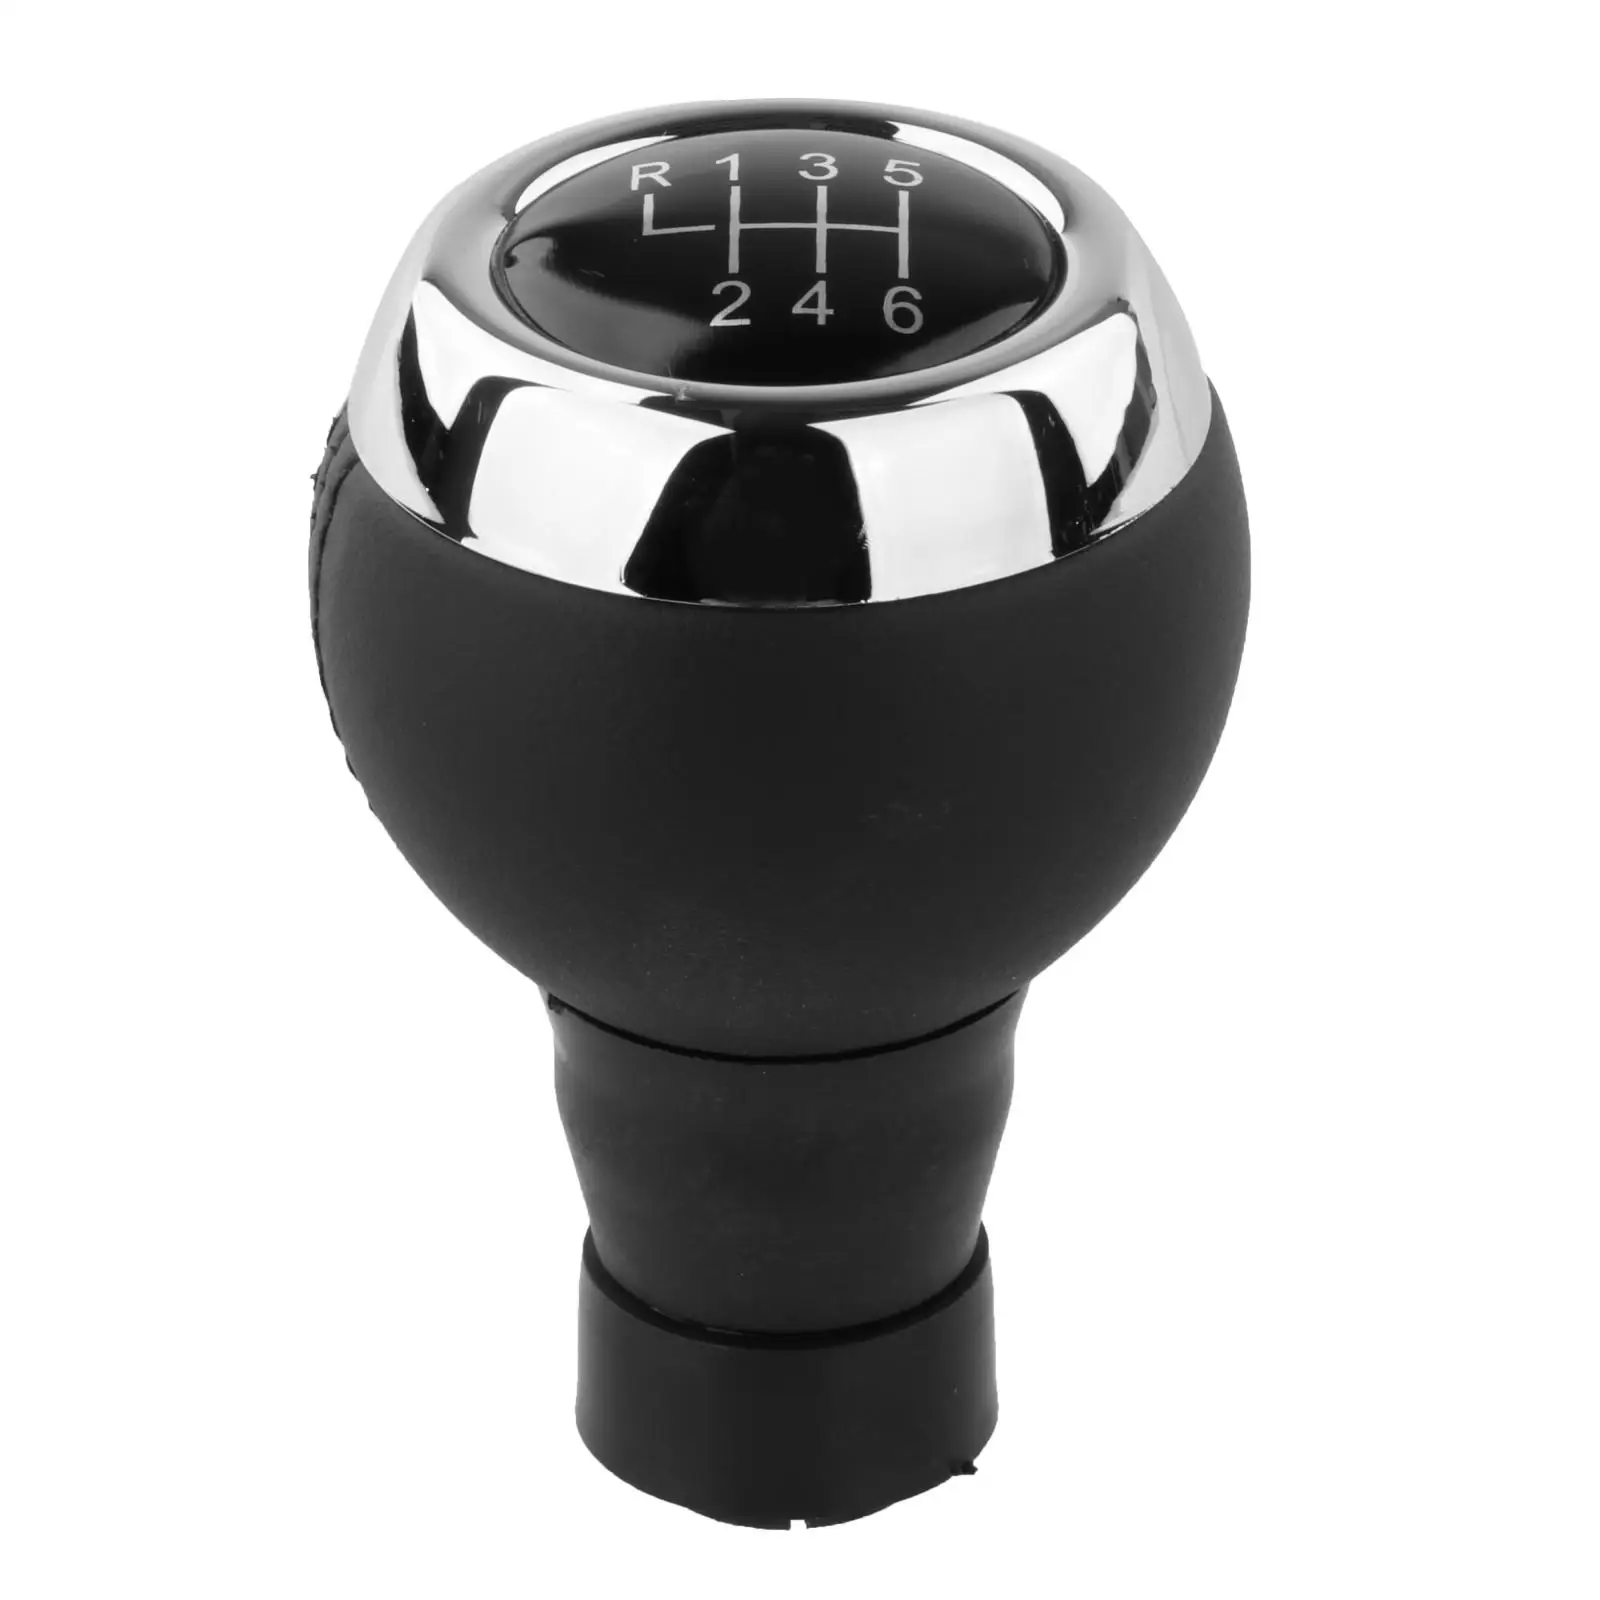 Gear Knob Head Manual Gear Knob 6  Modification Fit for bmw Mini, Car Parts Replacement, Easy to Install